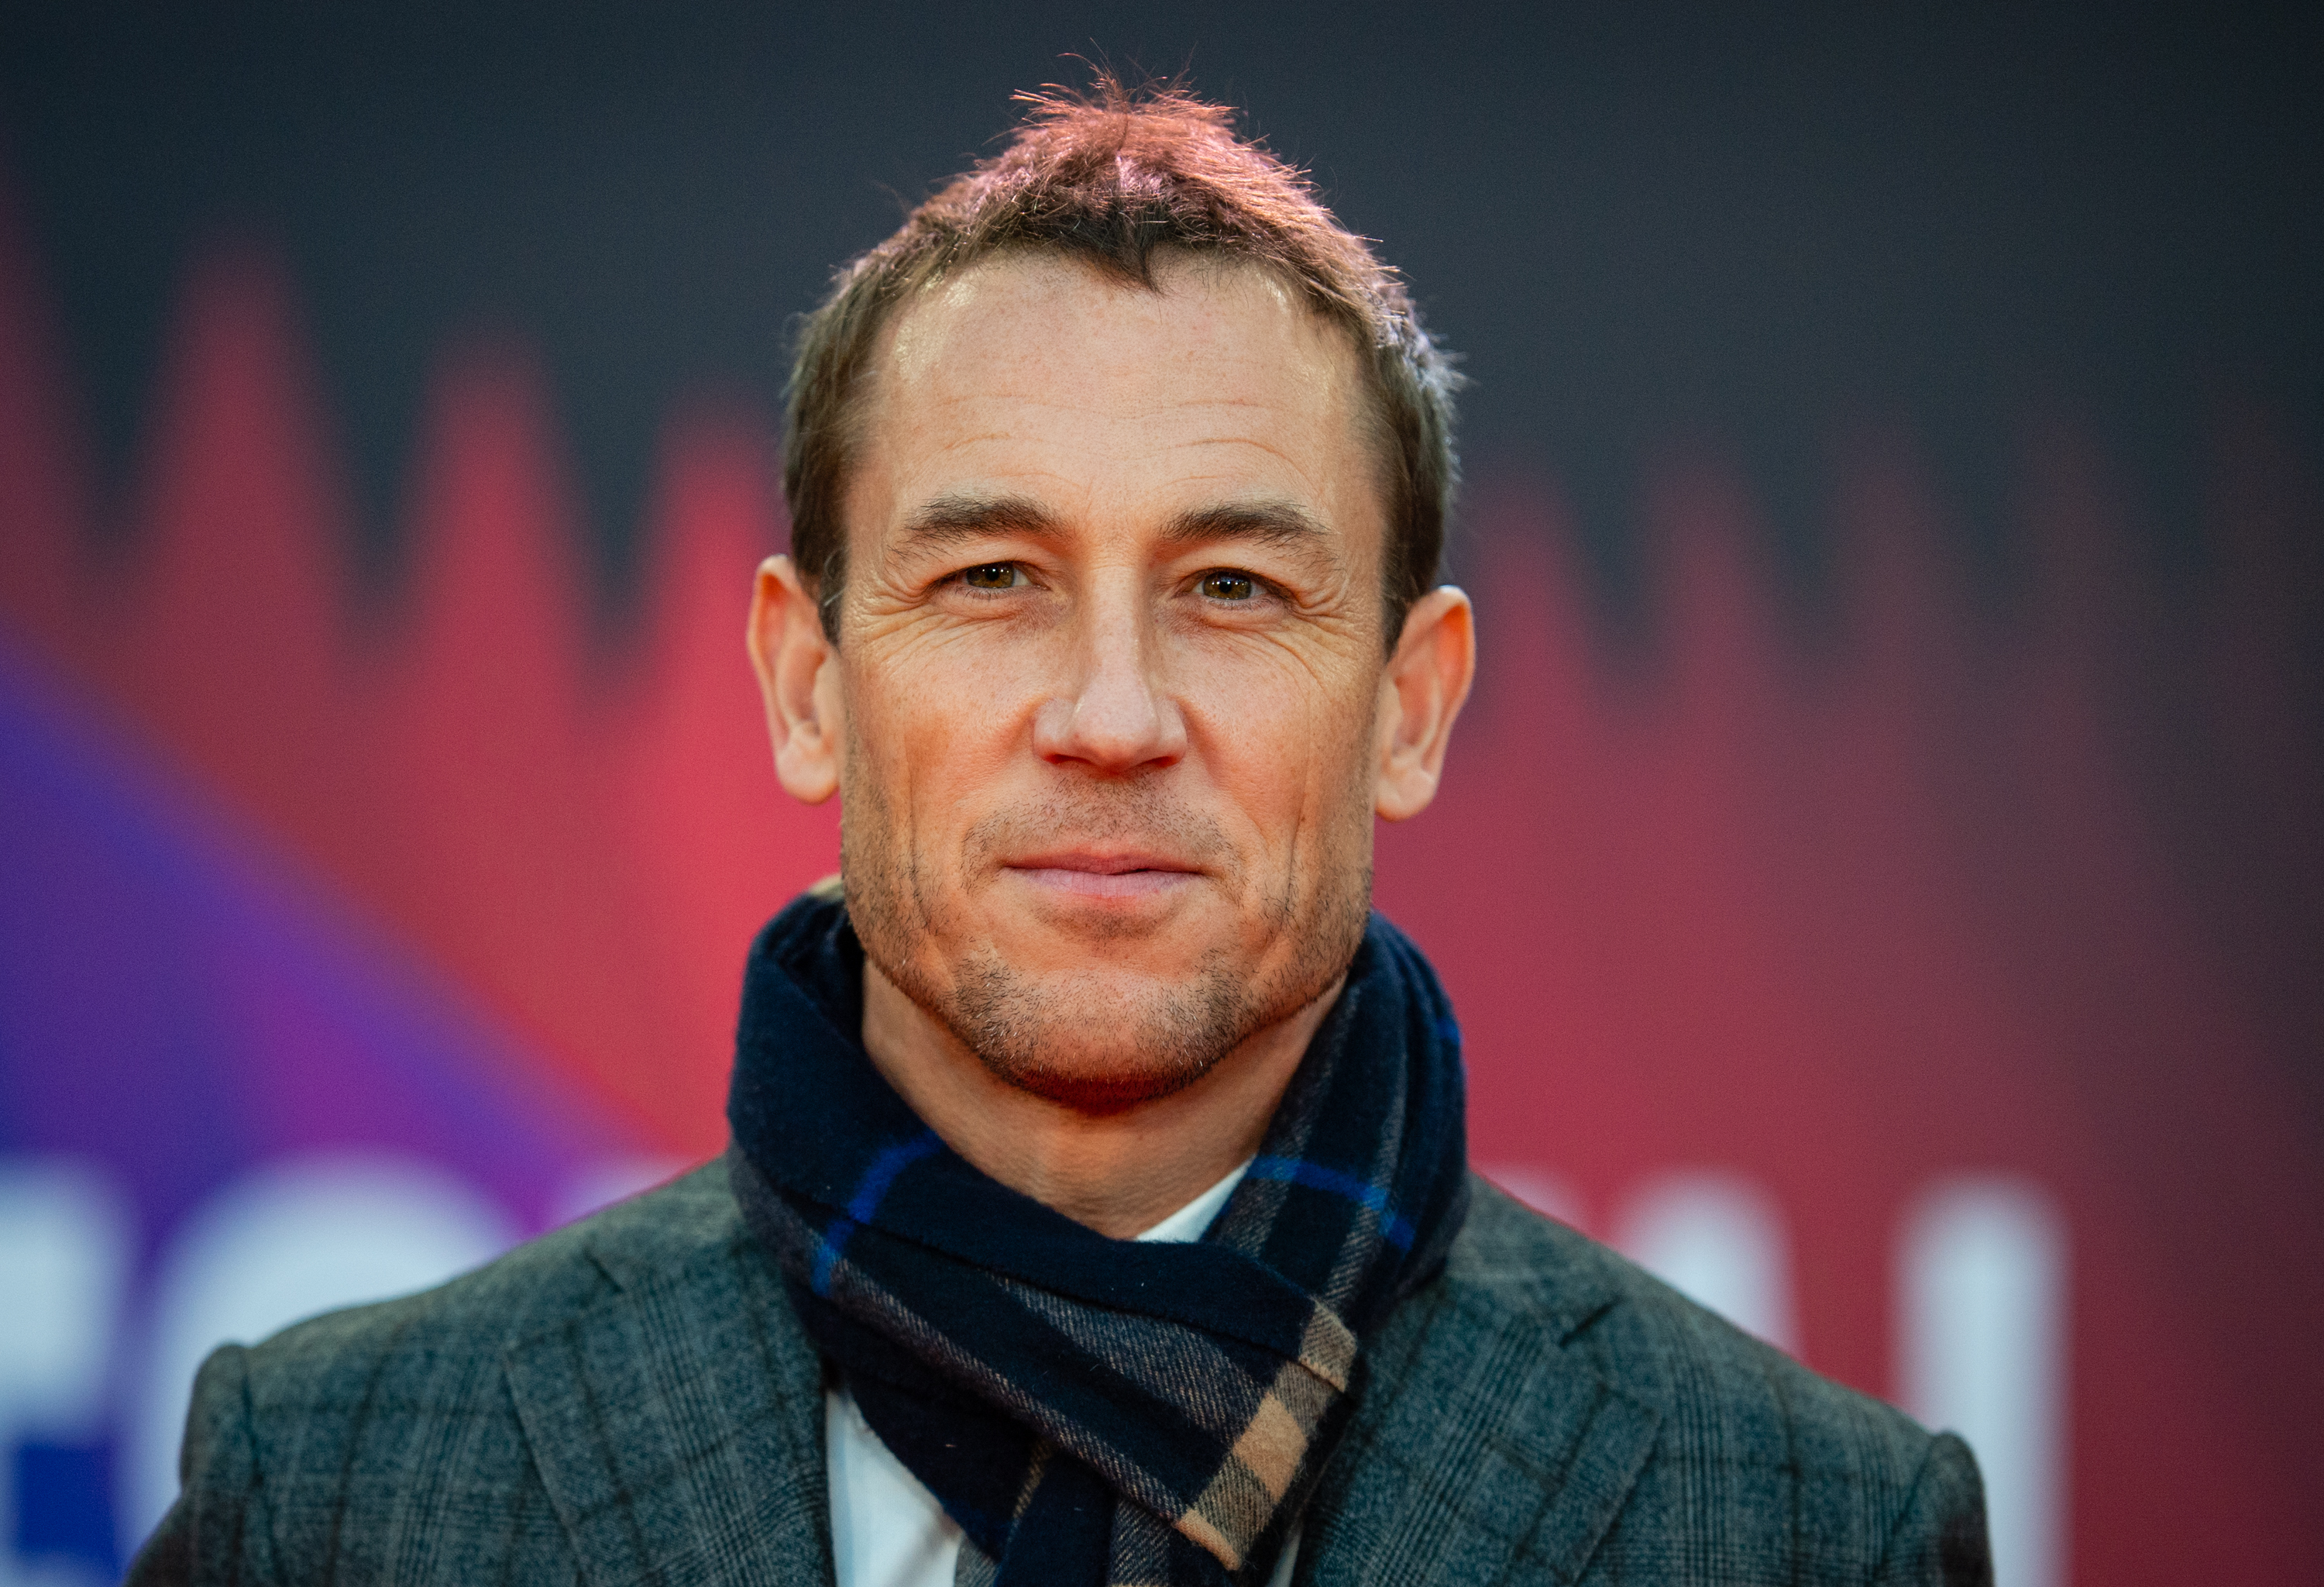 Tobias Menzies in der Royal Festival Hall am 12. Oktober 2021 in London, England. | Quelle: Getty Images